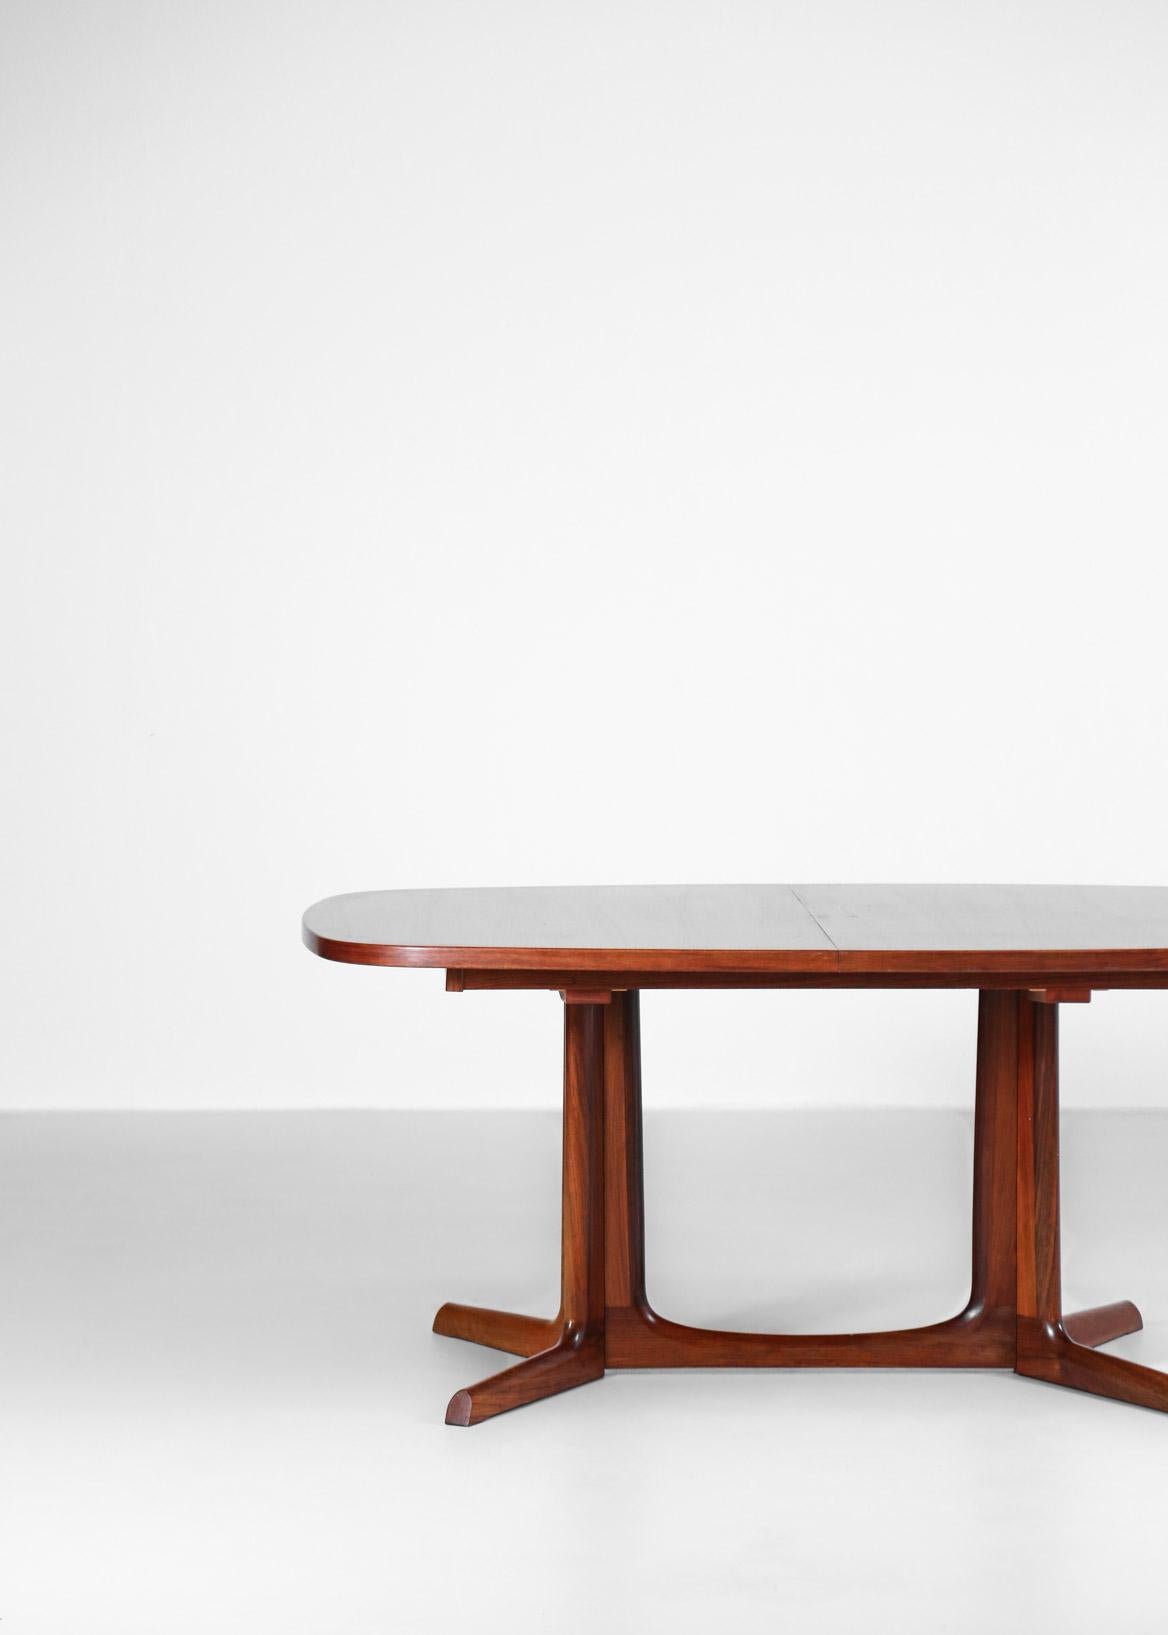 Danish Large Dining Table in Rosewood, Scandinavian Design 10 Person, 1960